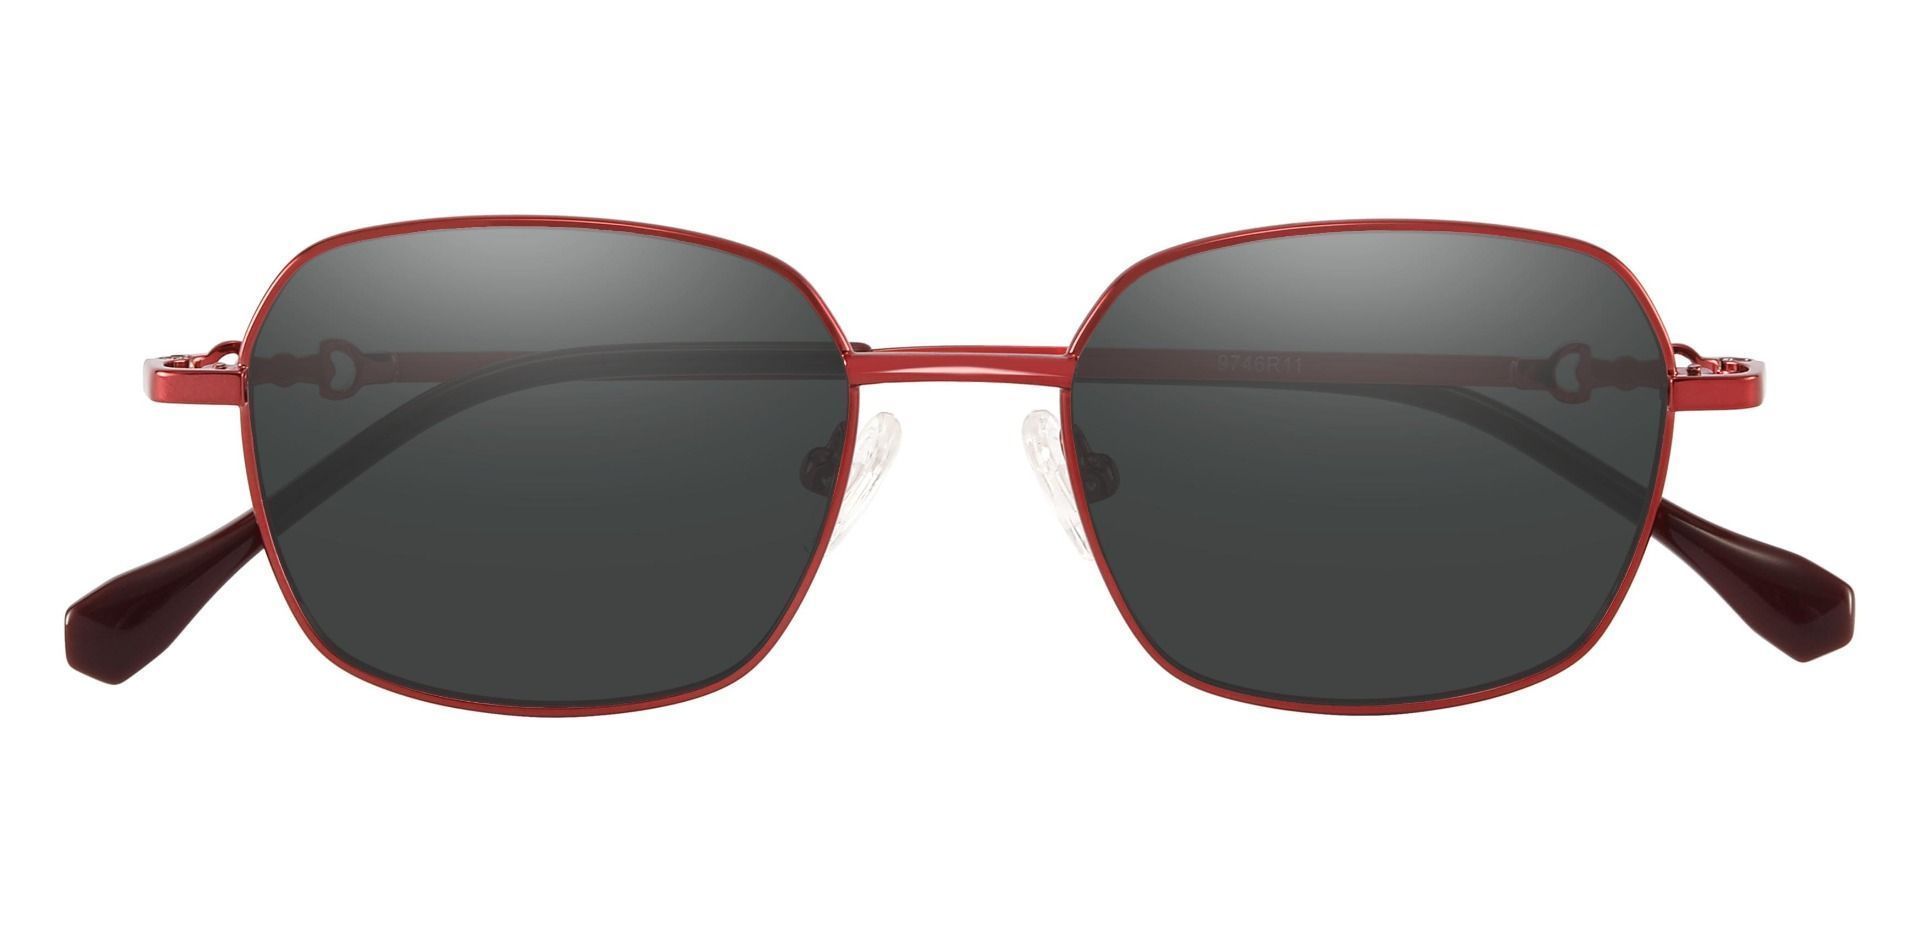 Averill Geometric Lined Bifocal Sunglasses - Red Frame With Gray Lenses